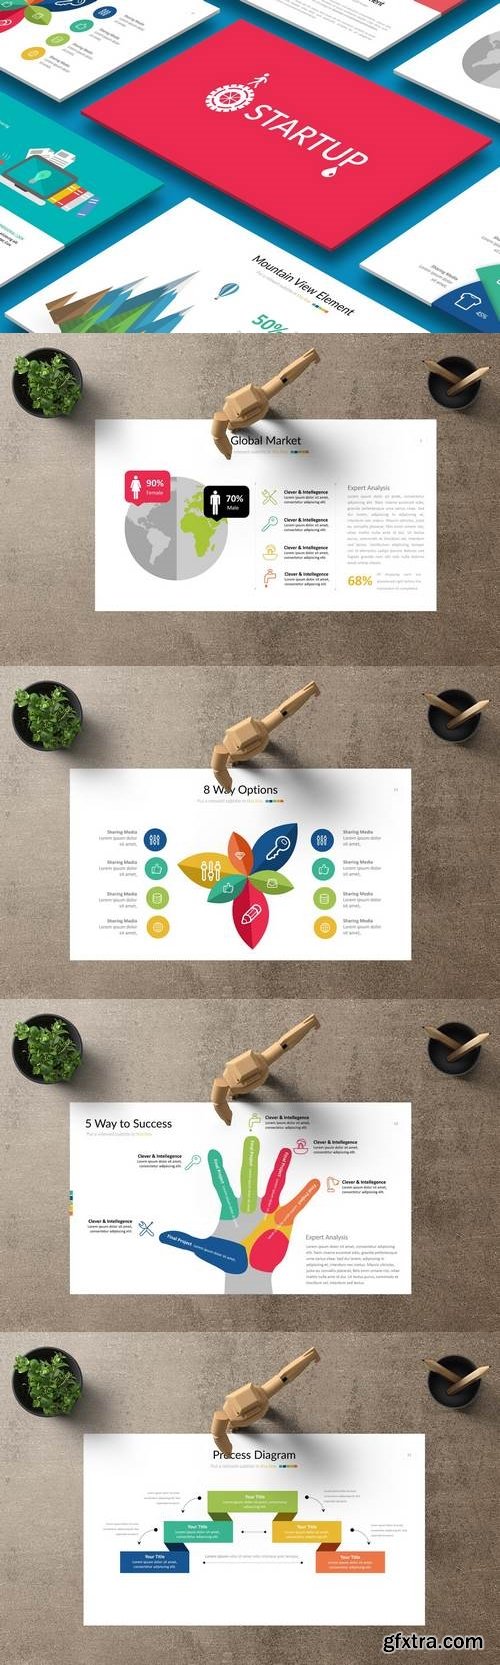 STARTUP Powerpoint Template